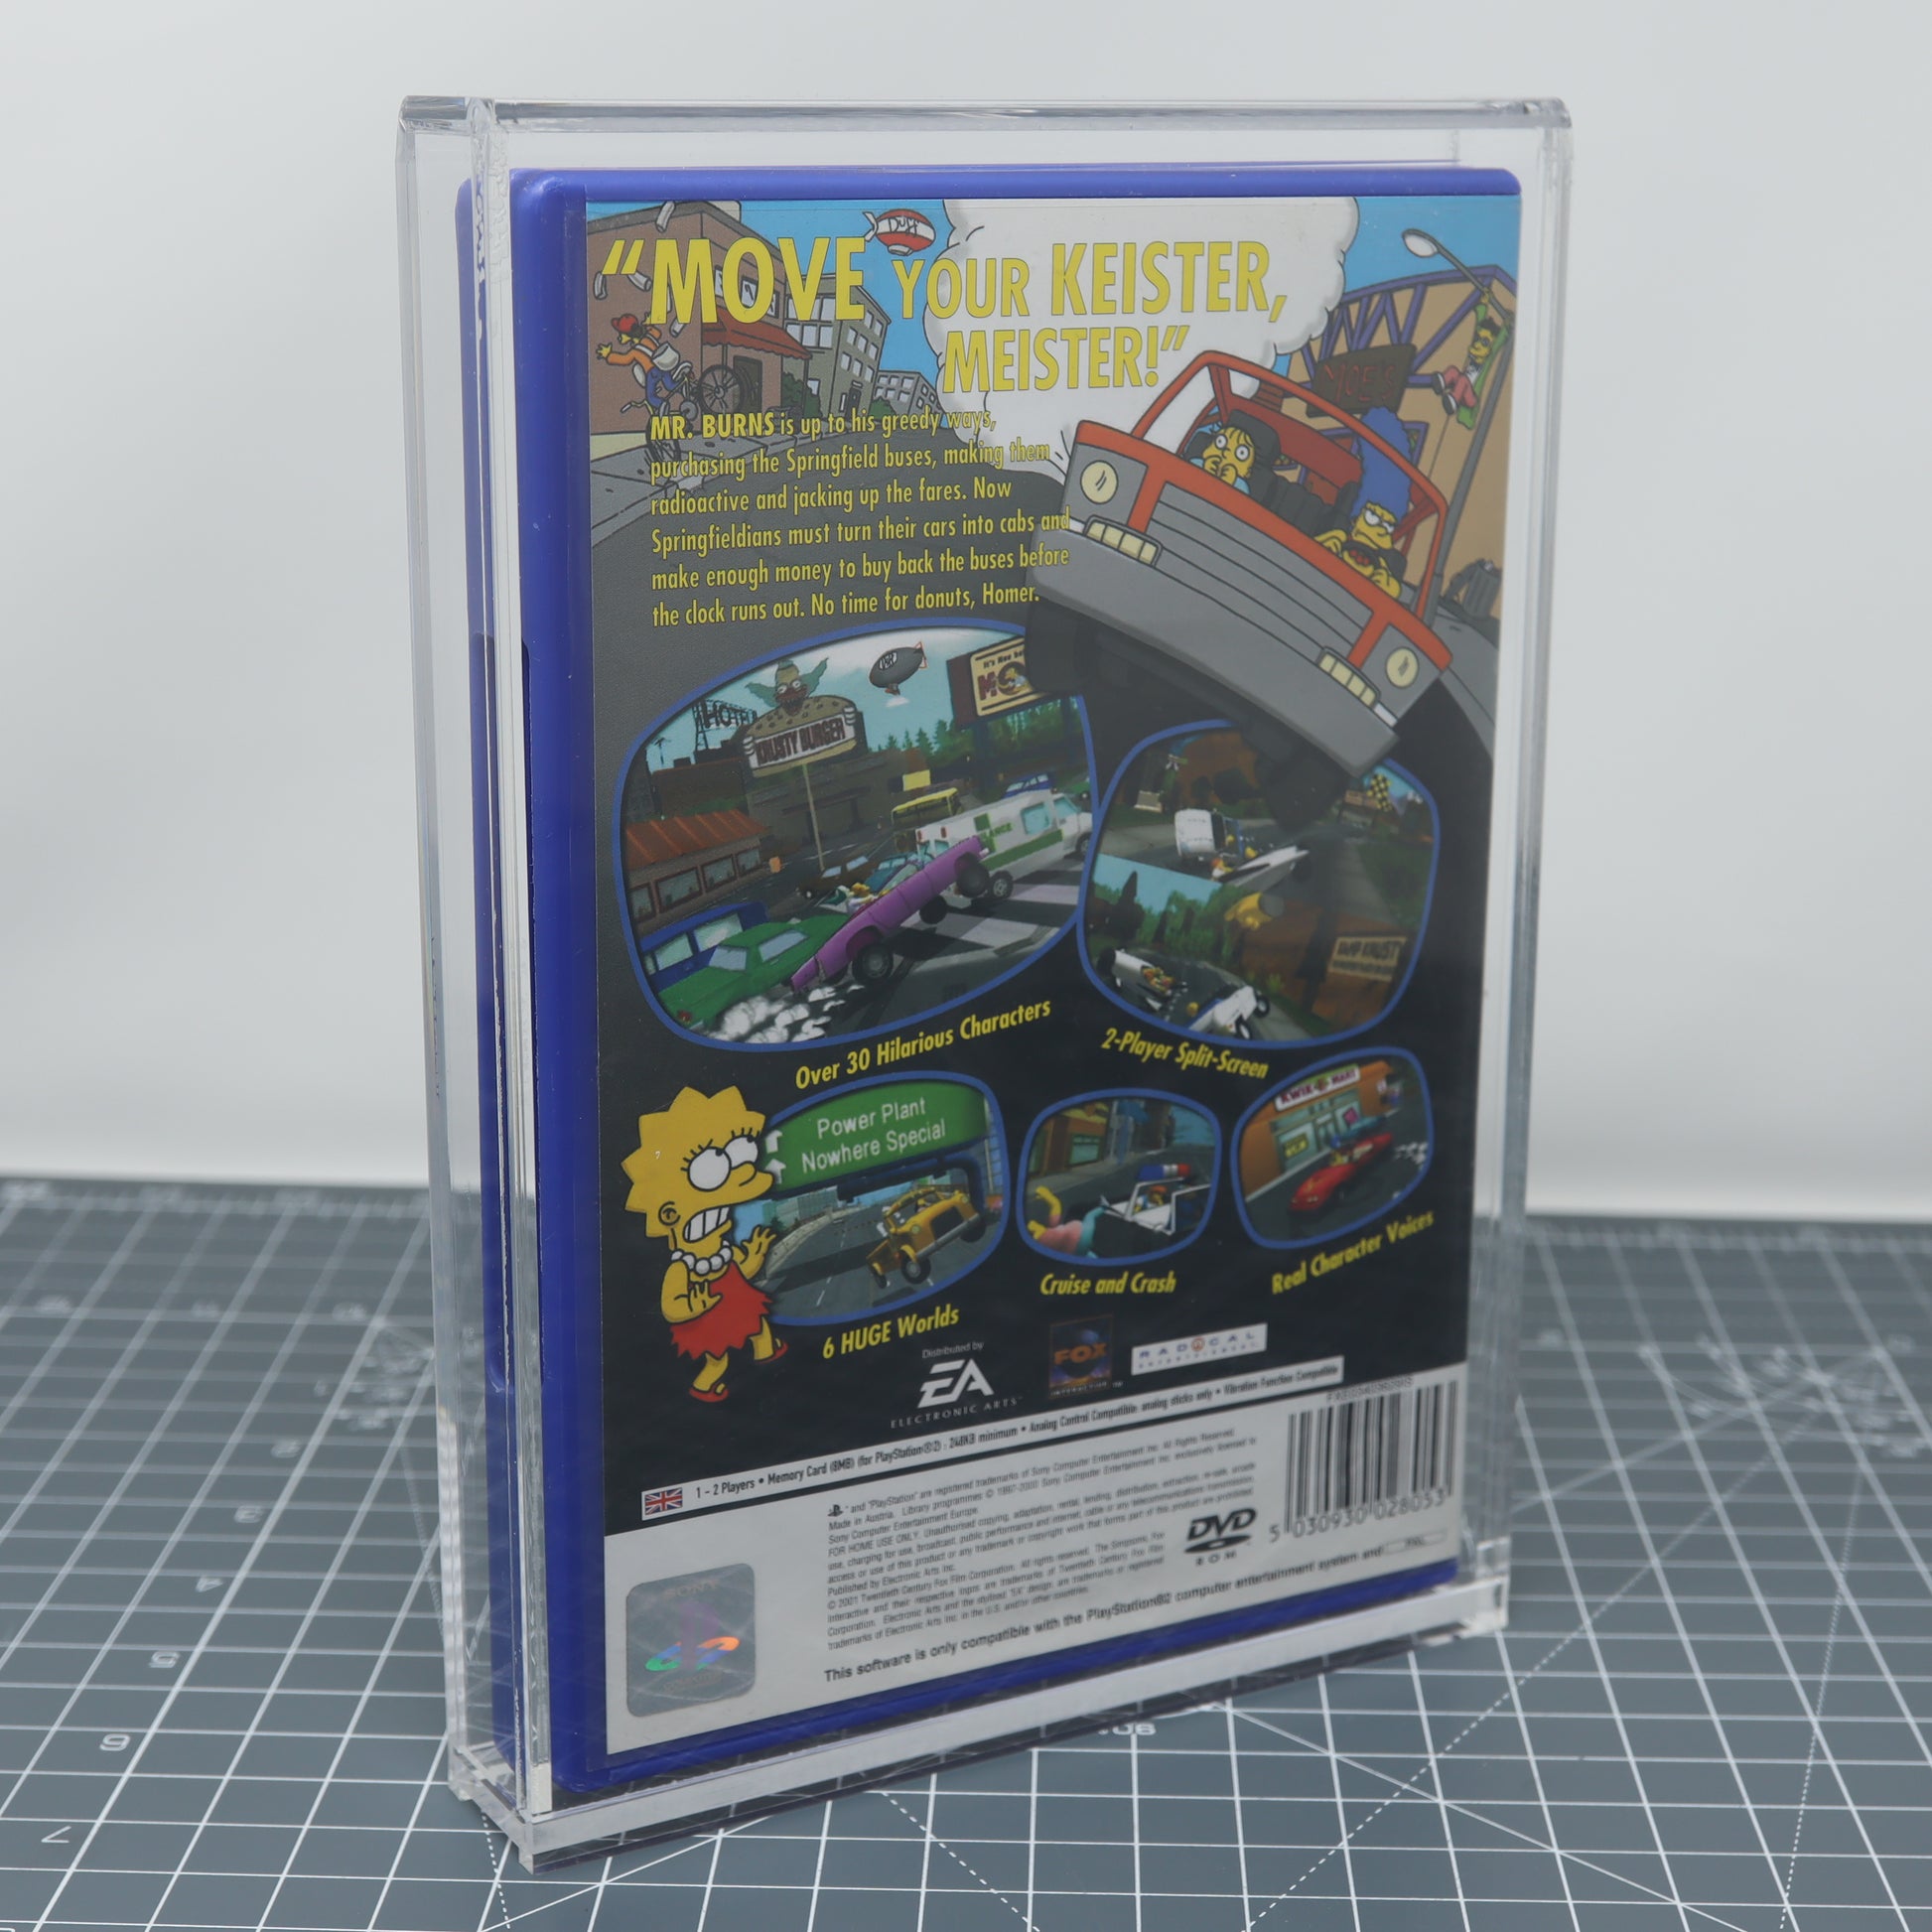 Lab Fifteen Co custom acrylic display capsule for Sony Playstation 2 game case simpsons road rage rear cover